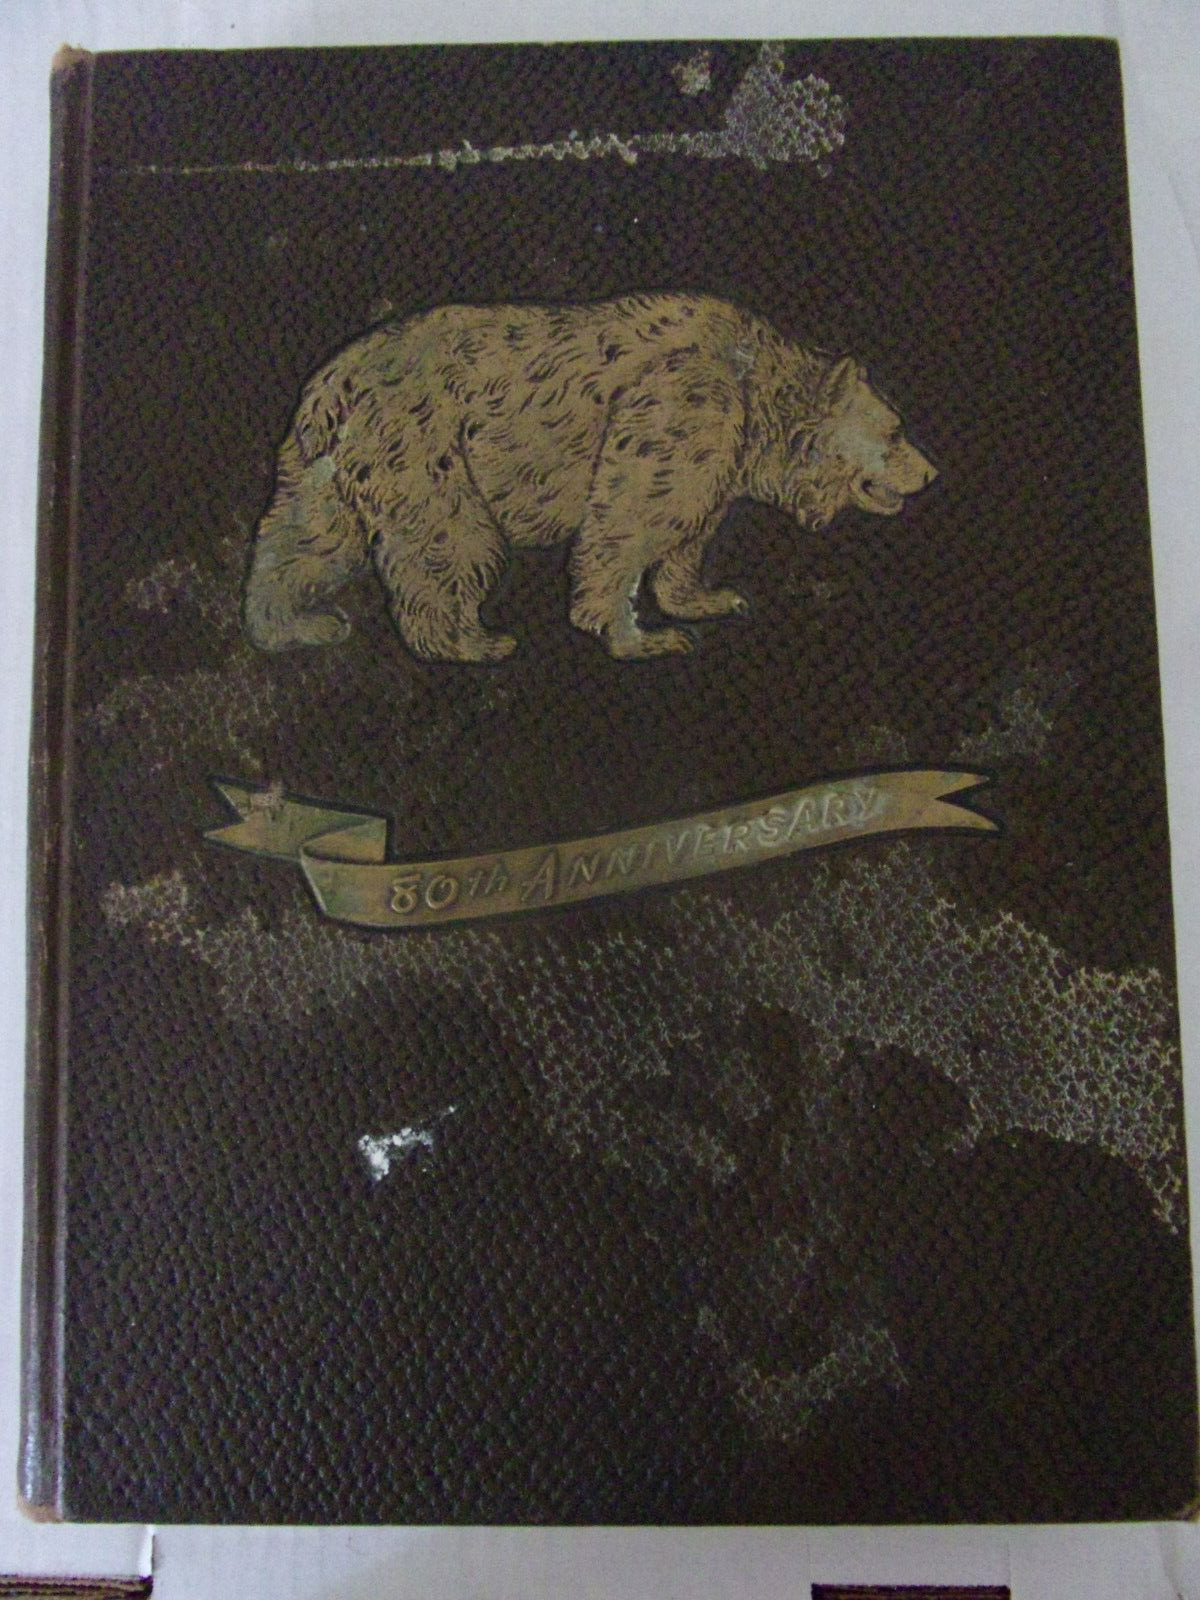 Yearbook - 1948 University of California - Blue and Gold Vol. 75